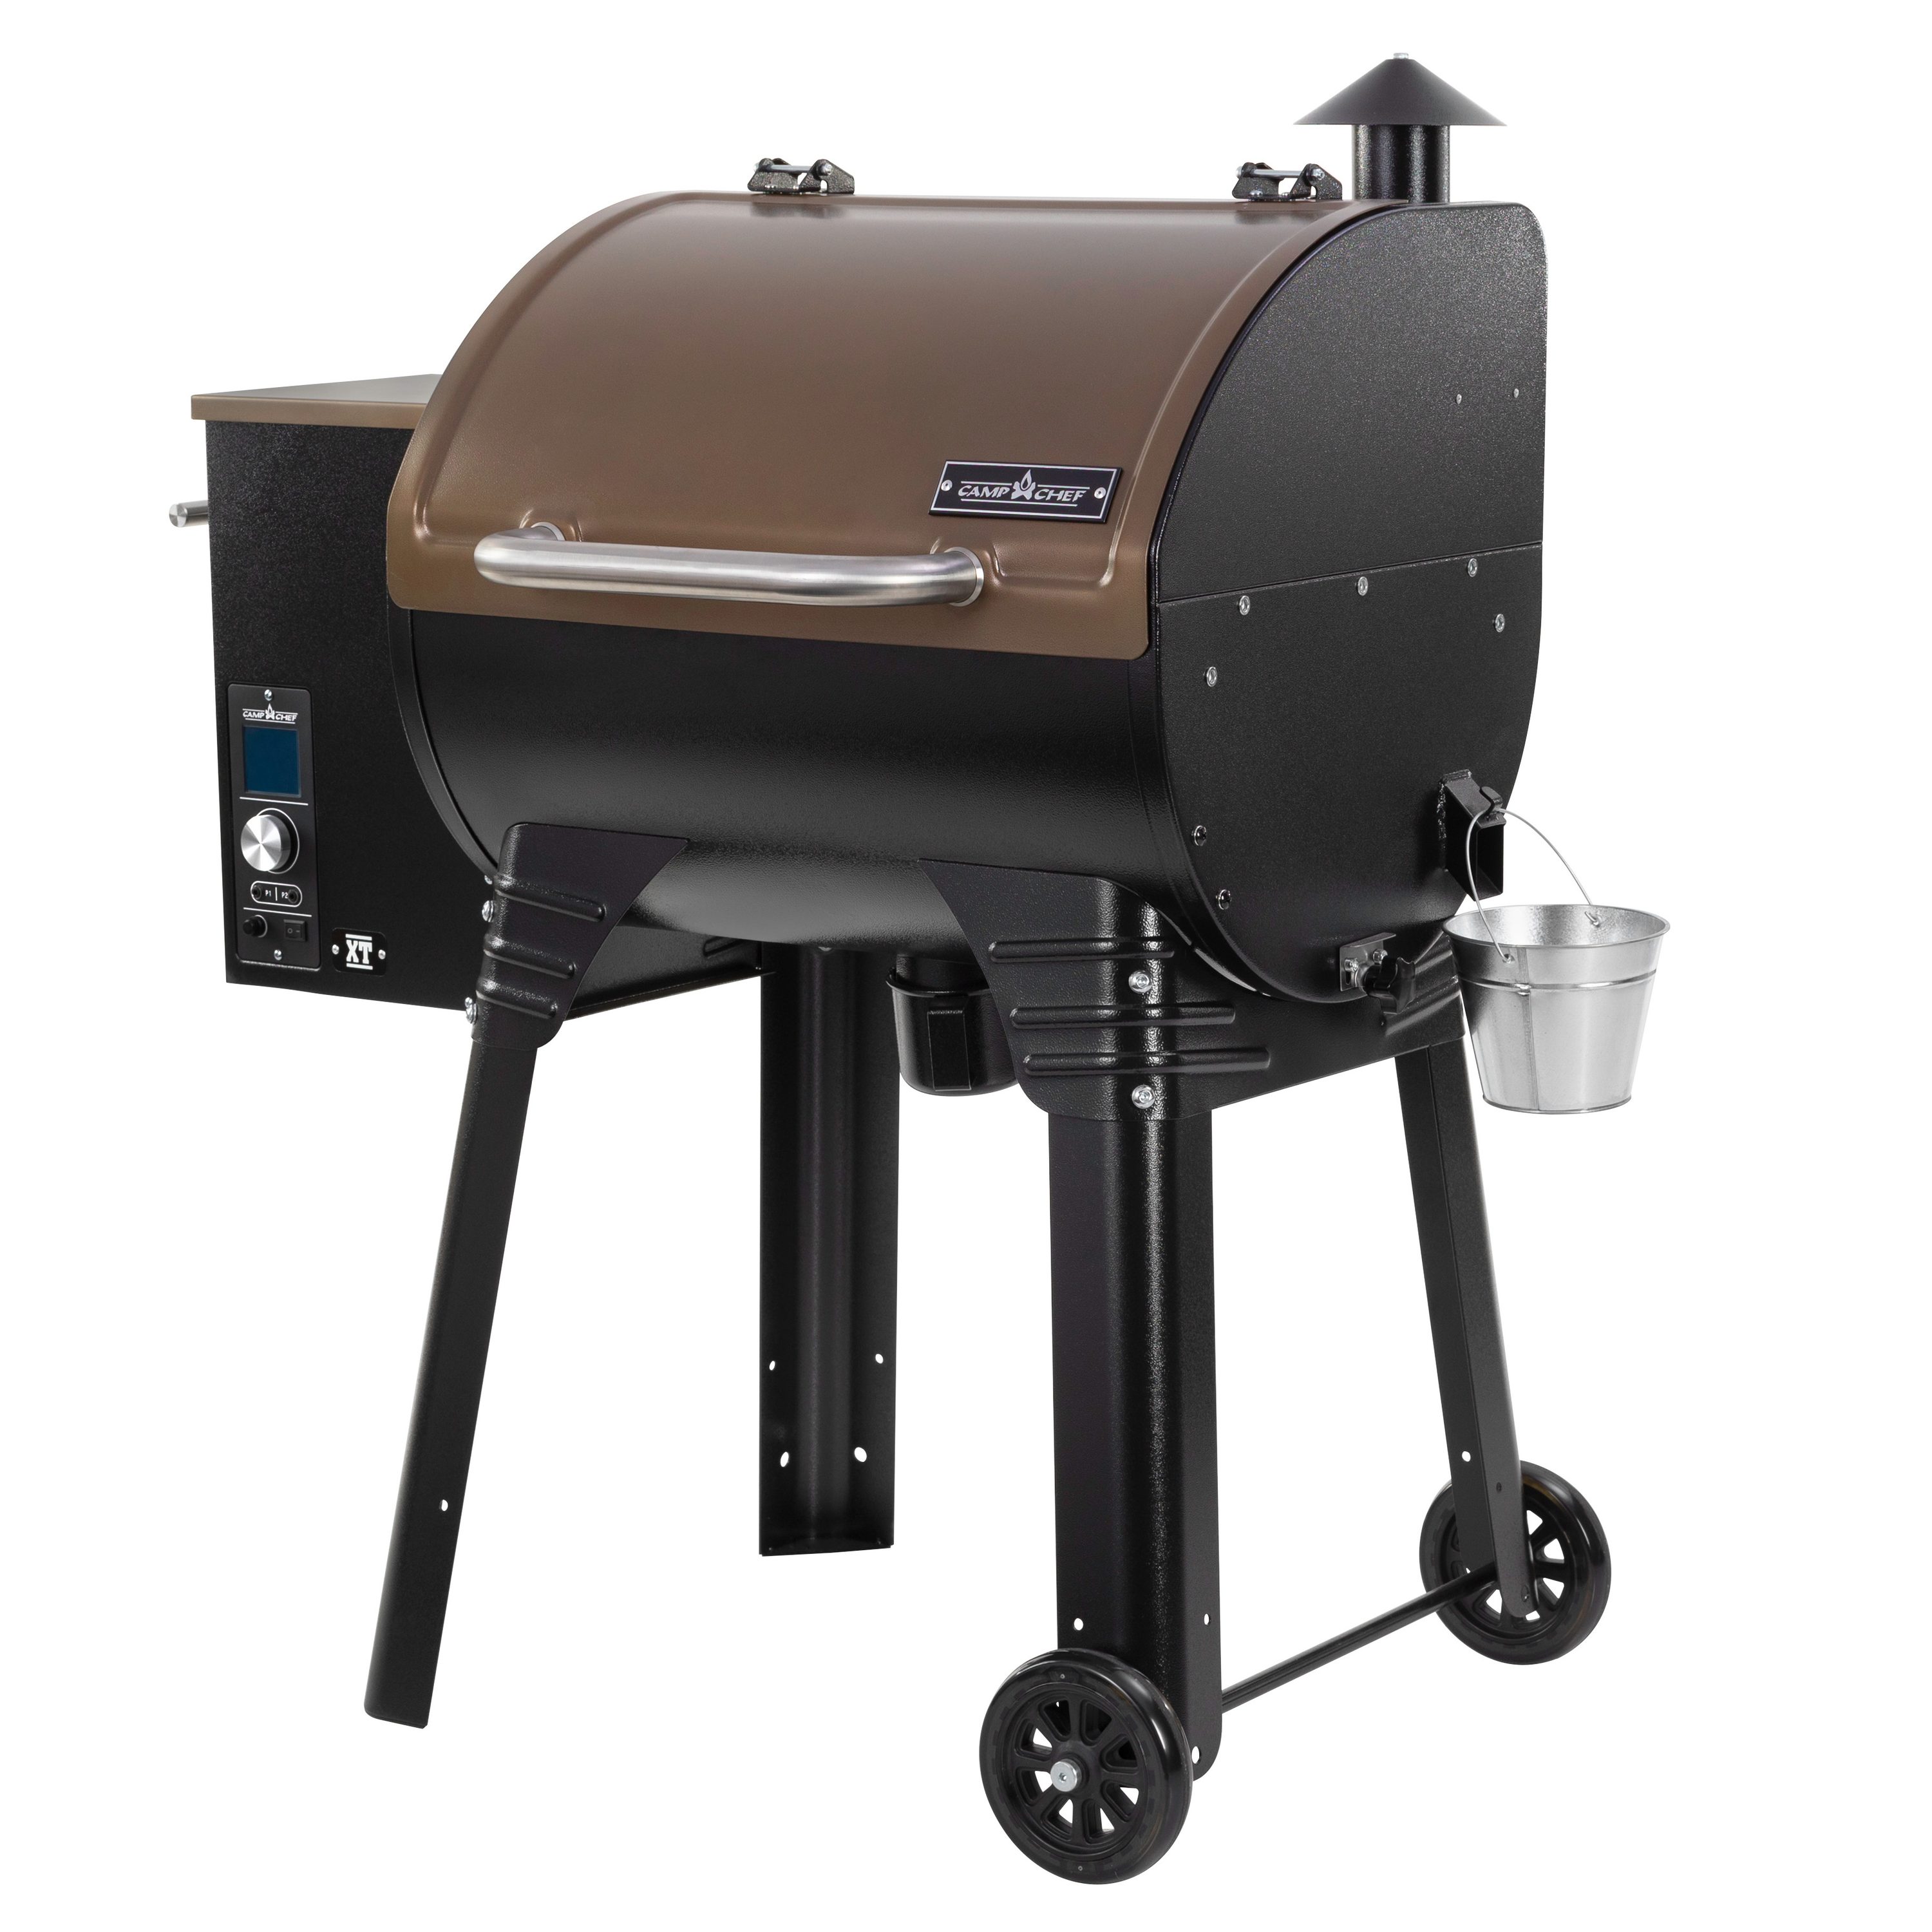 Camp Chef SmokePro DLX Pellet Grill Review - Hey Grill, Hey